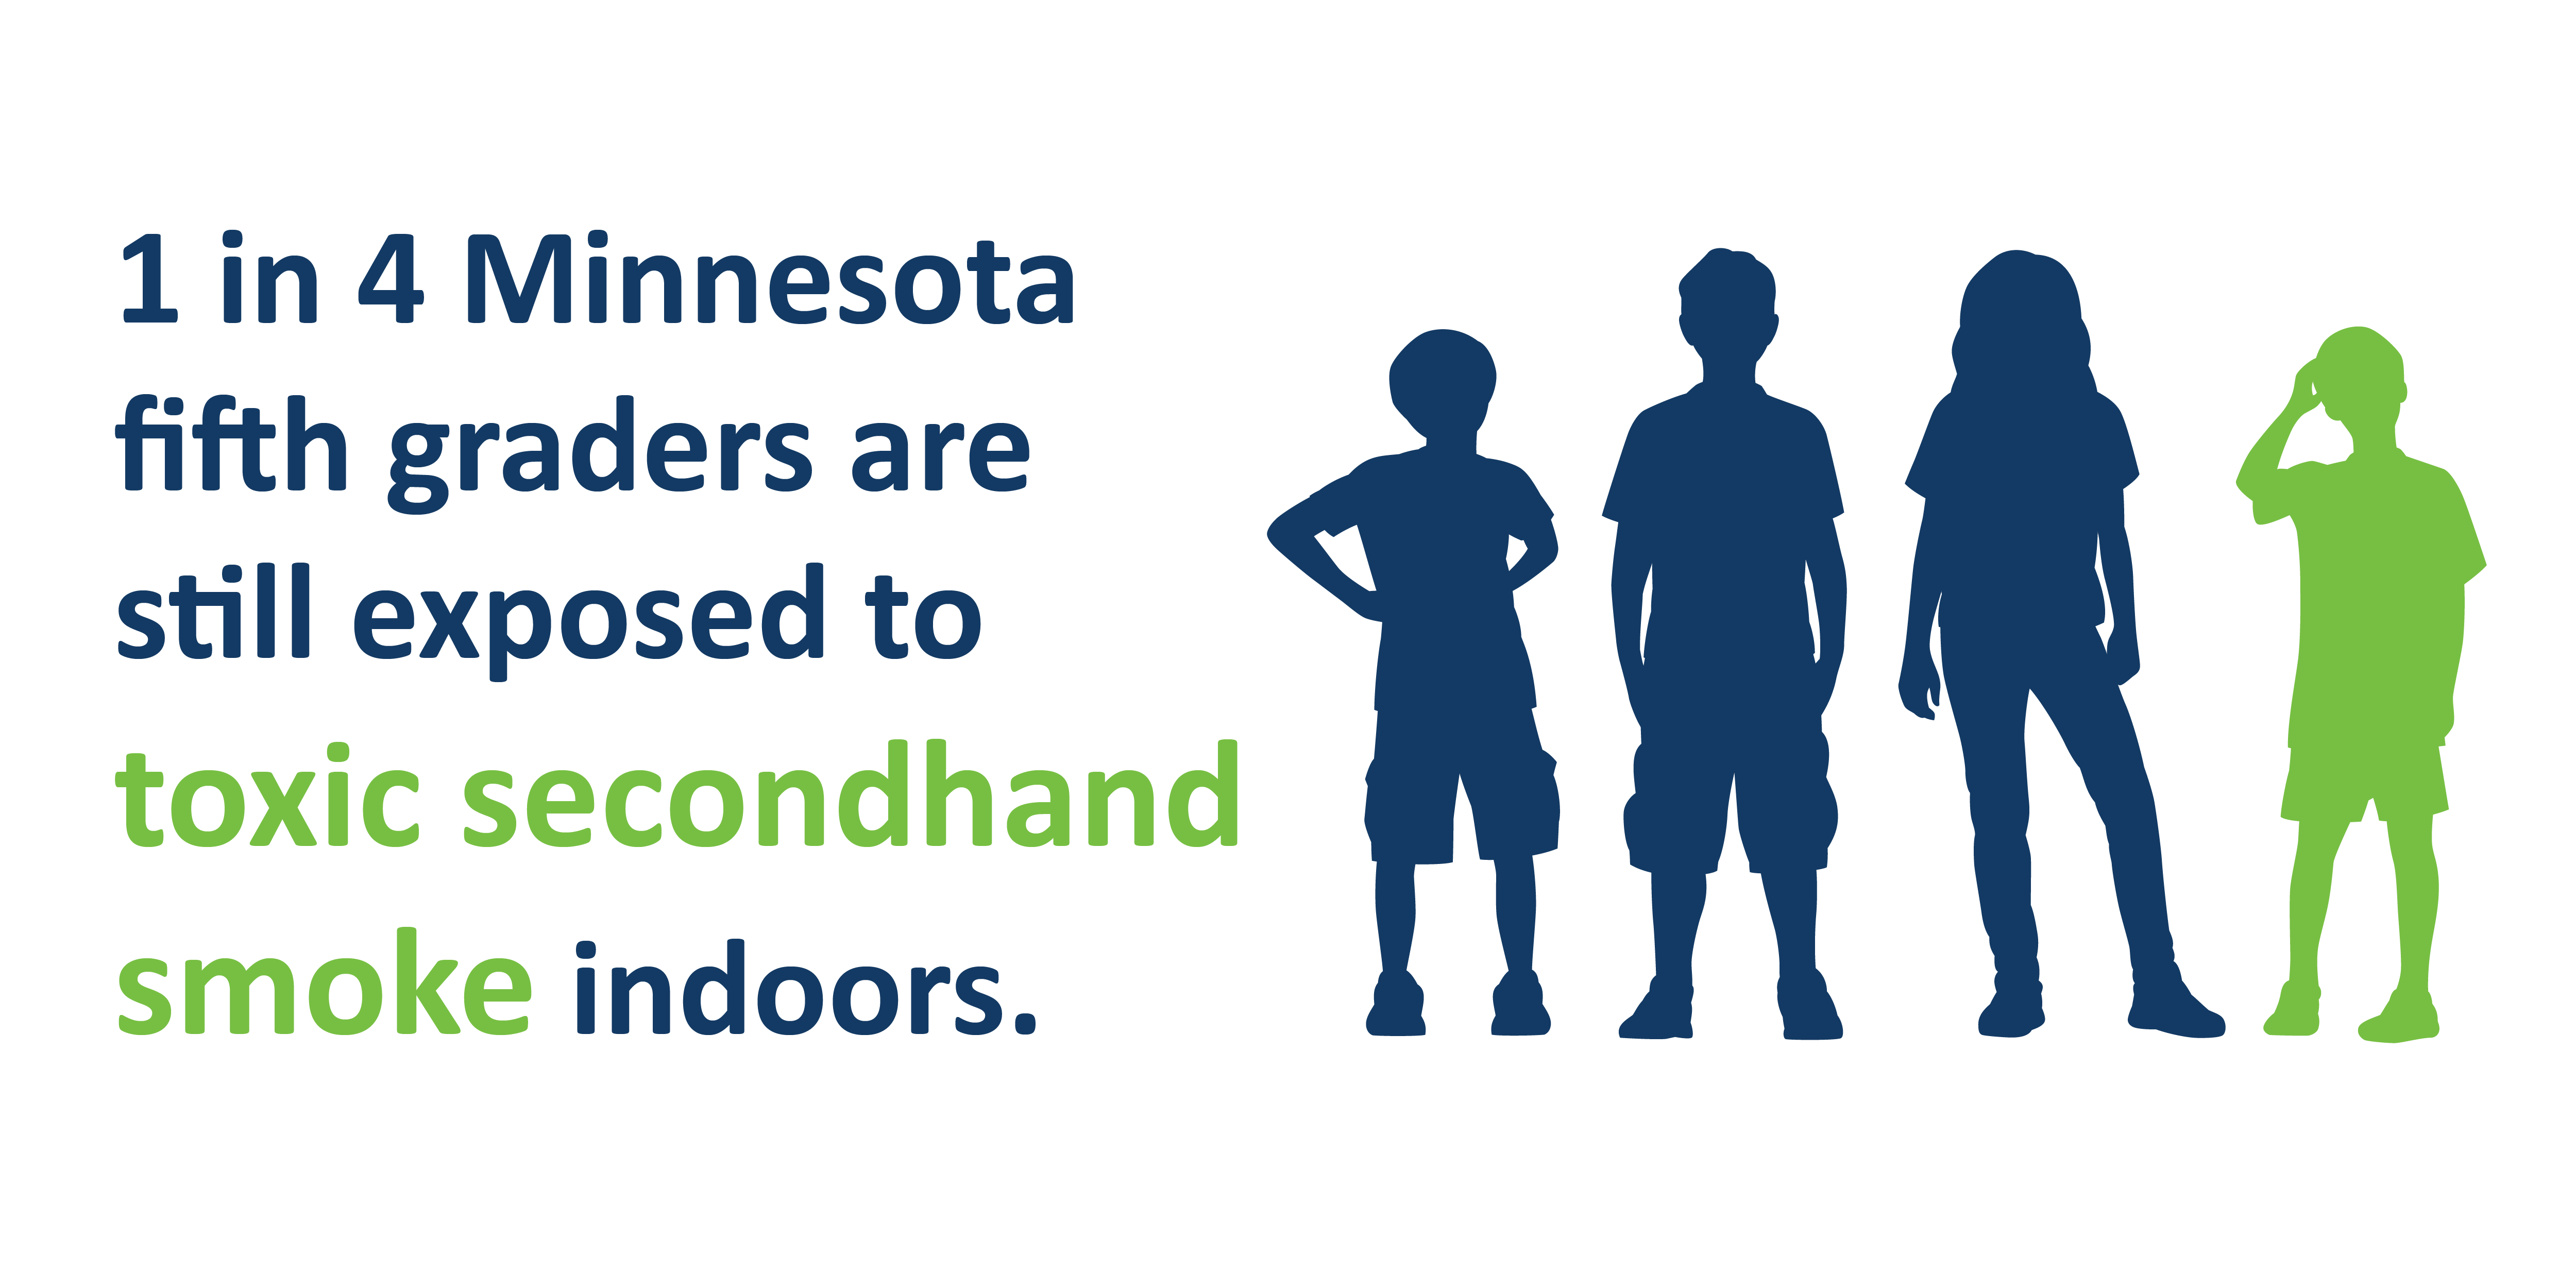 graphic stating 1 in 4 minnesota 5th graders are still exposed to toxic secondhand smoke indoors.